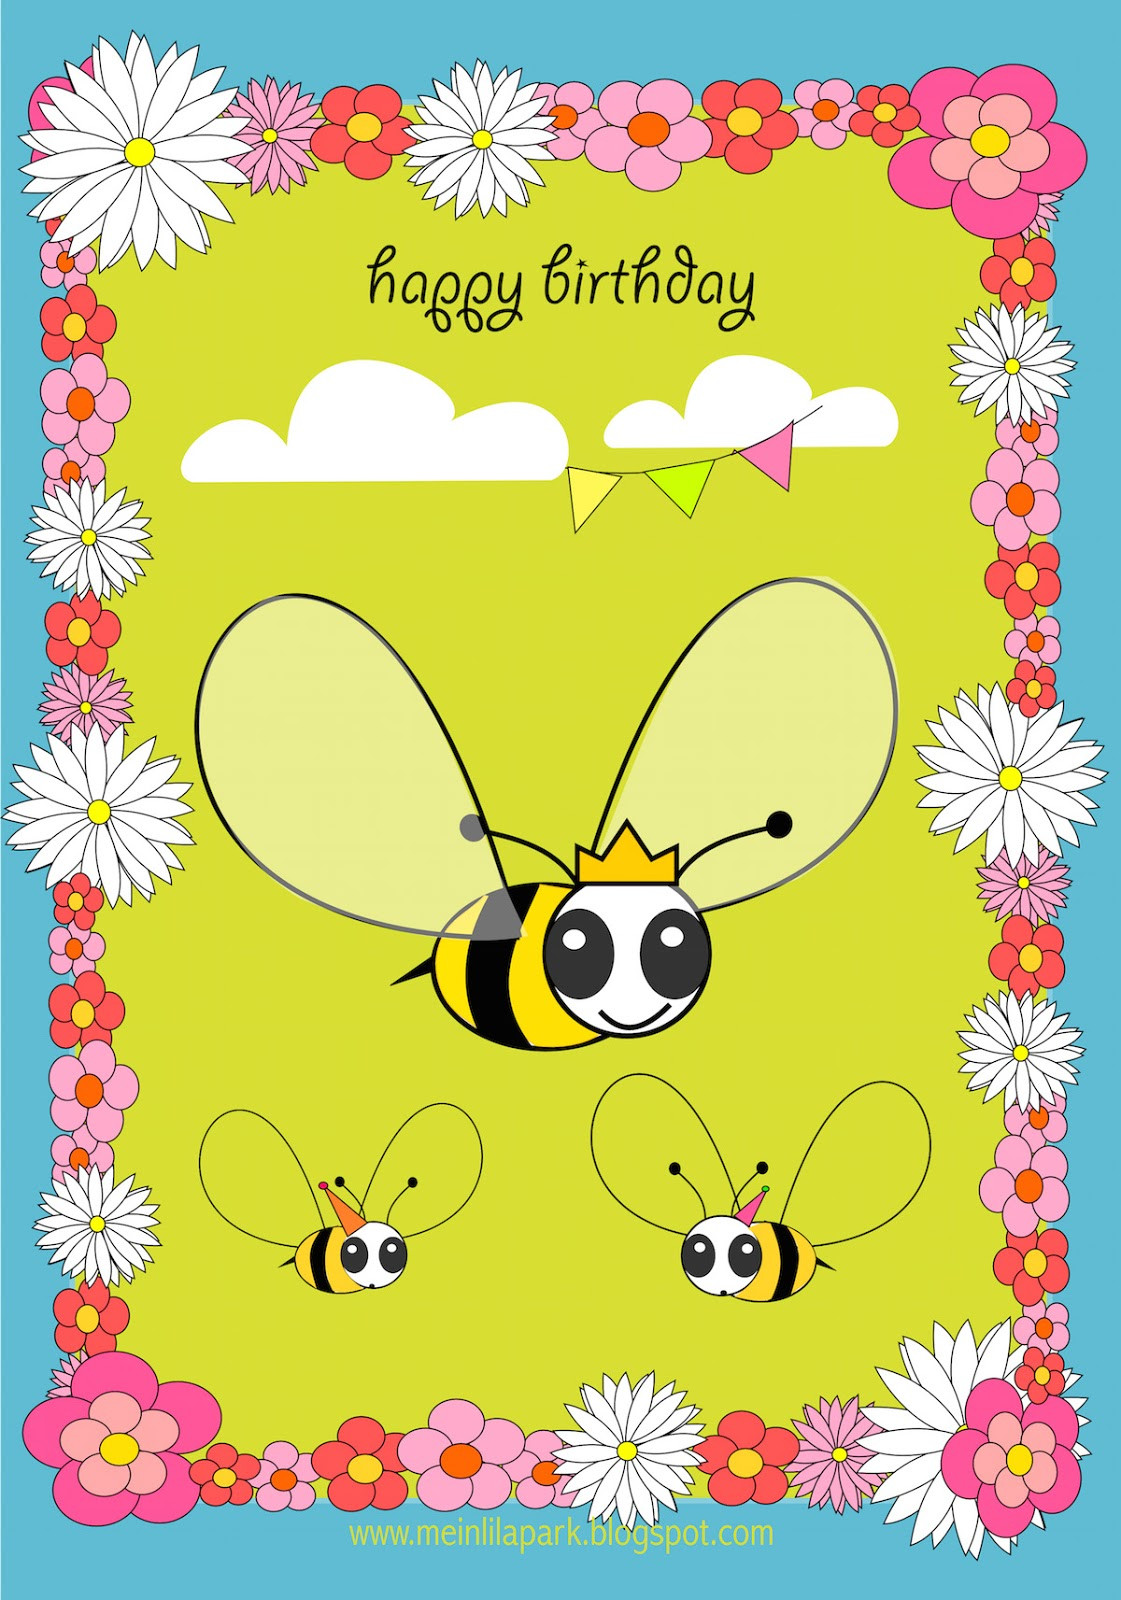 Free Printable Birthday Cards For Adults
 Free printable Happy Birthday card for kids ausdruckbare